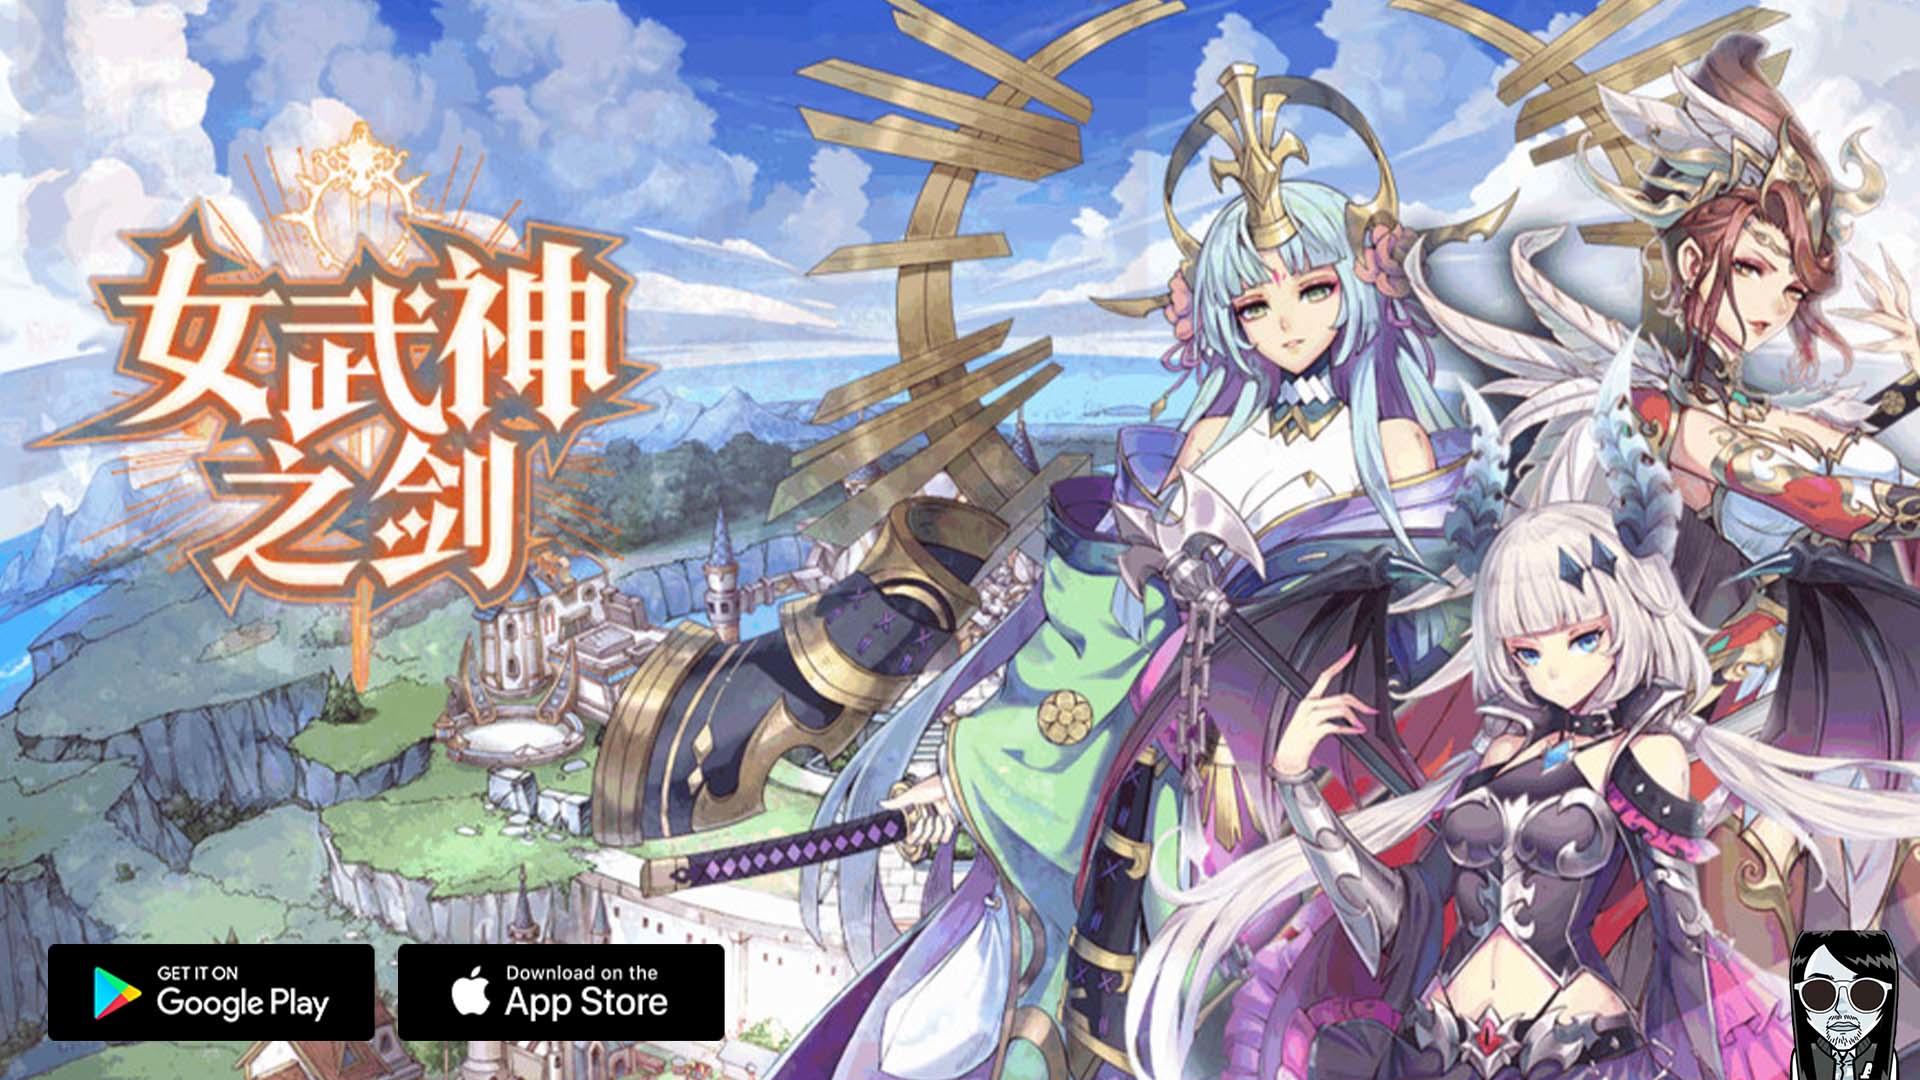 Valkyrie Story on the App Store